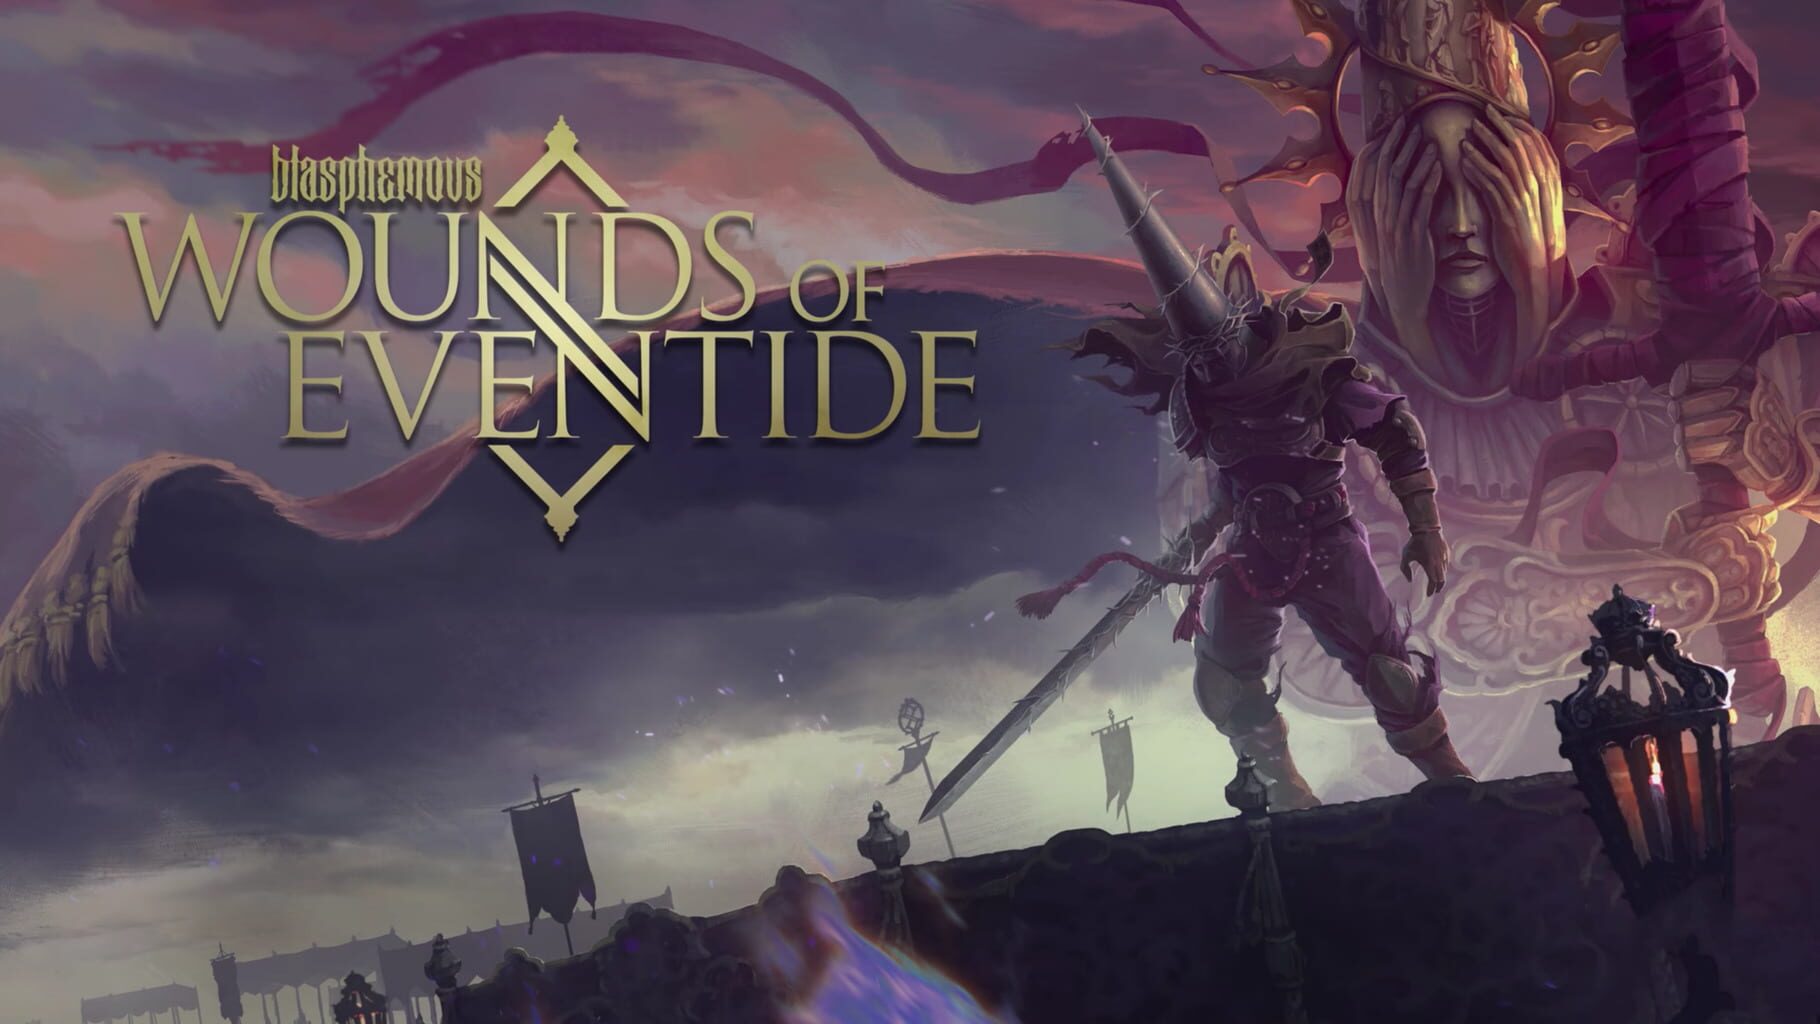 Blasphemous: Wounds of Eventide artwork